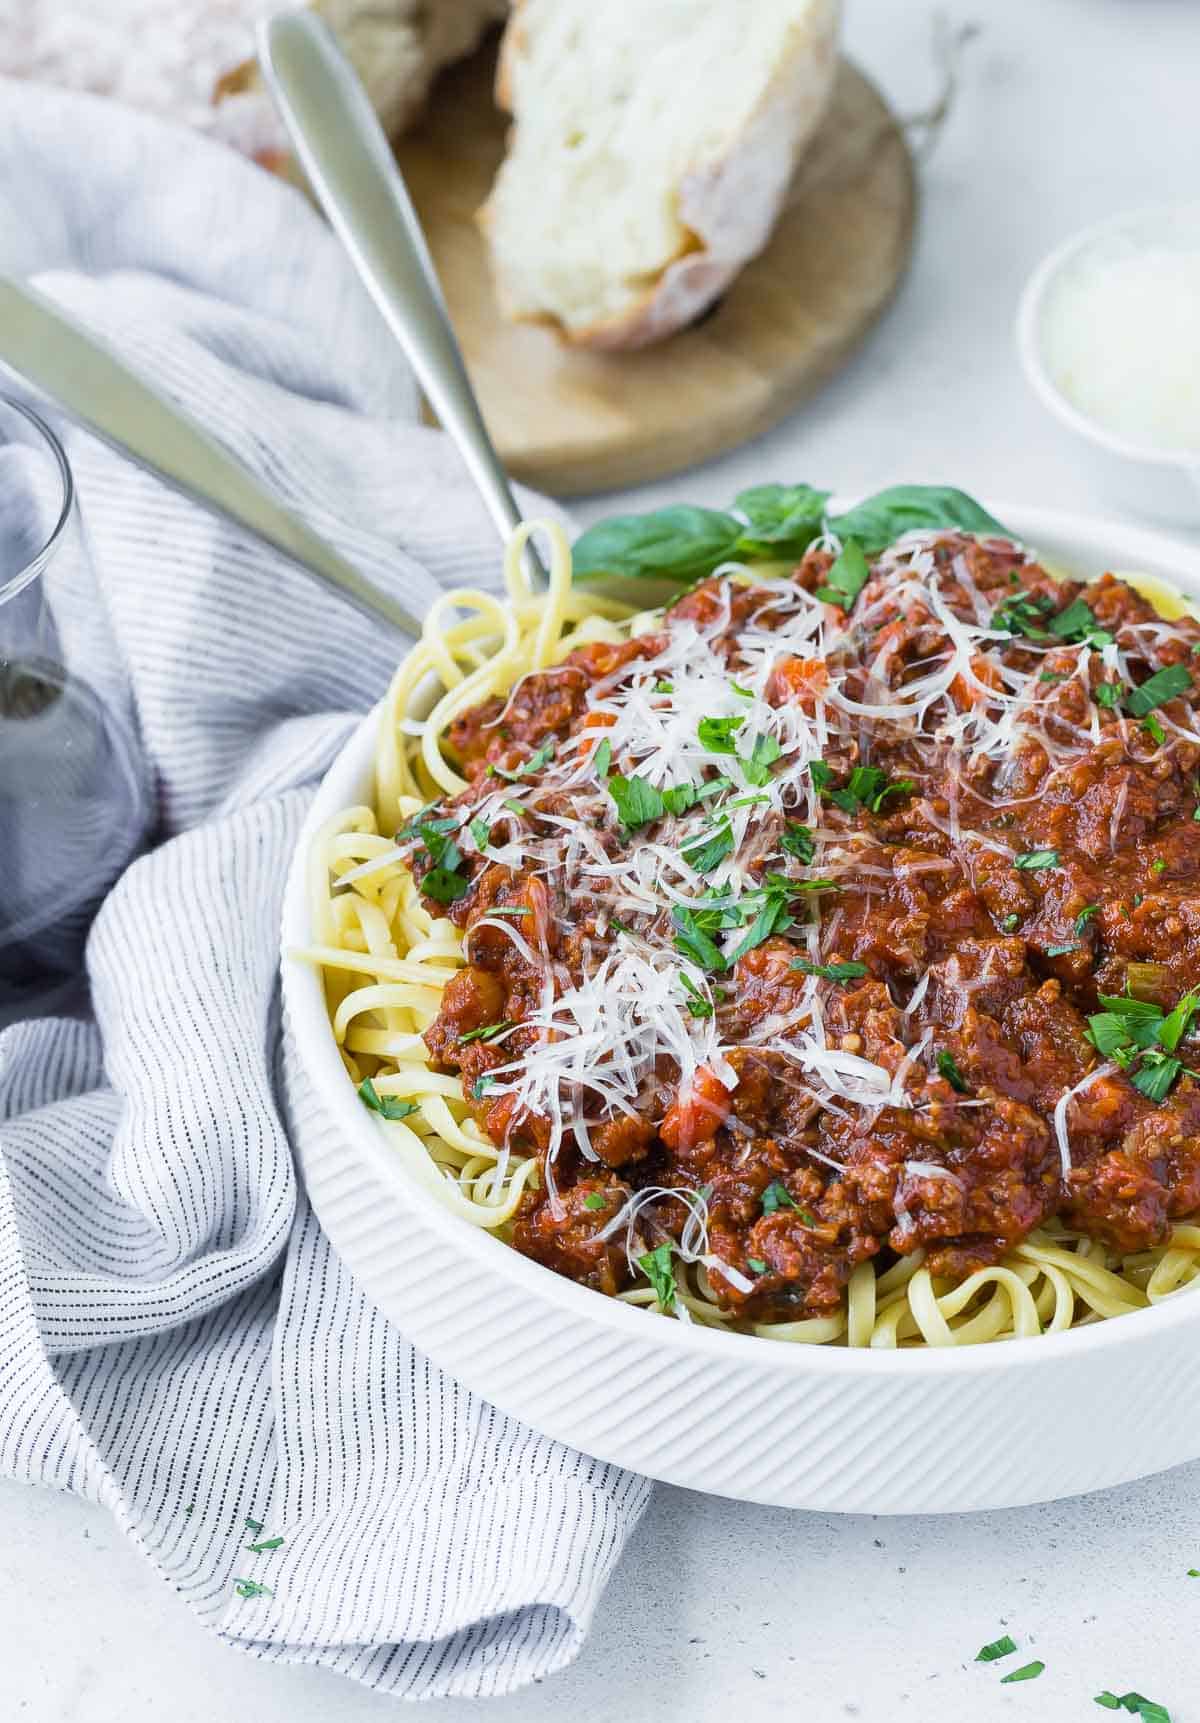 Spaghetti and Bolognese sauce in a white bowl, bread in background.